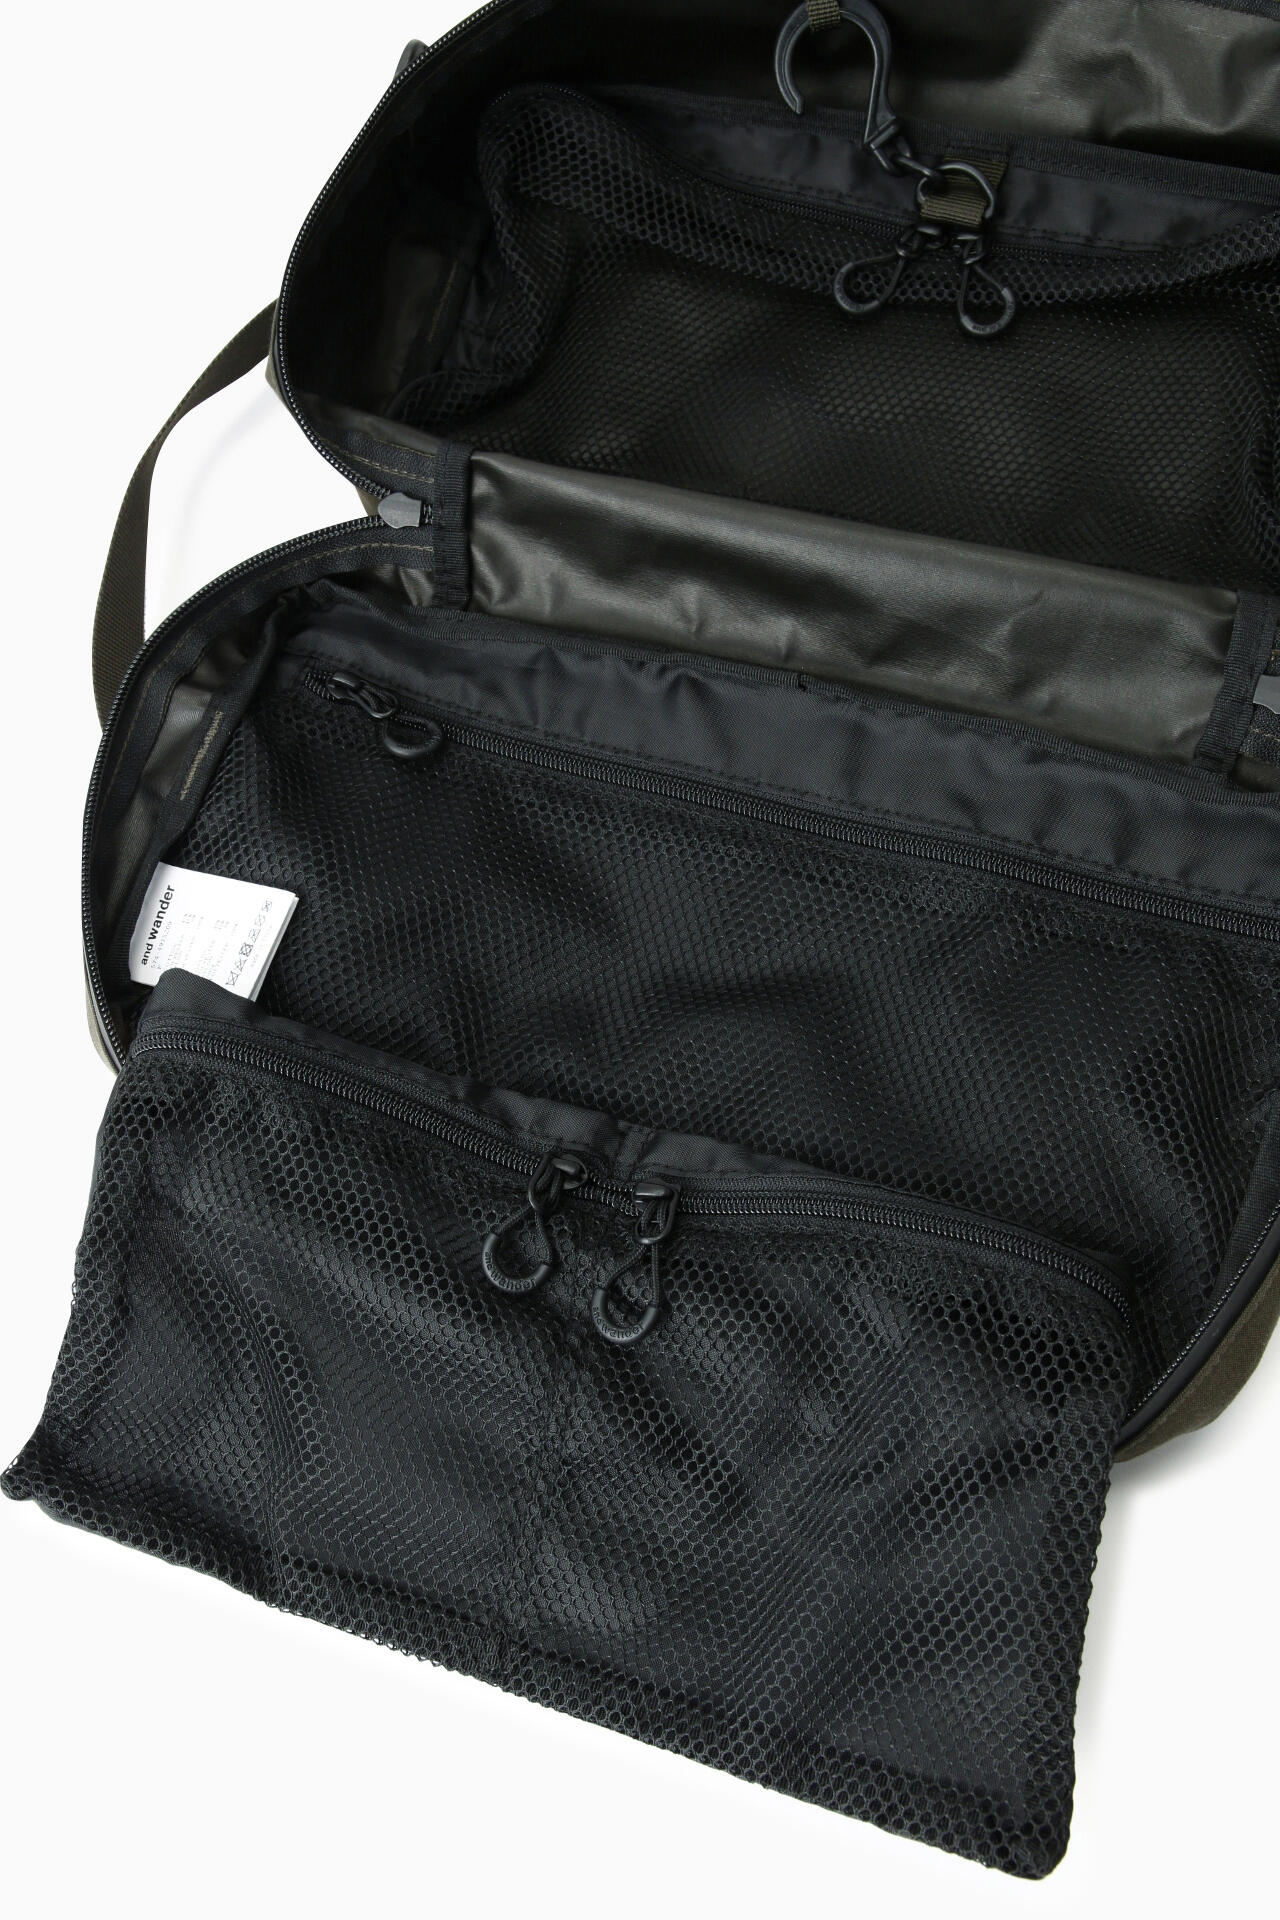 PE/CO tool bag | bags | and wander ONLINE STORE